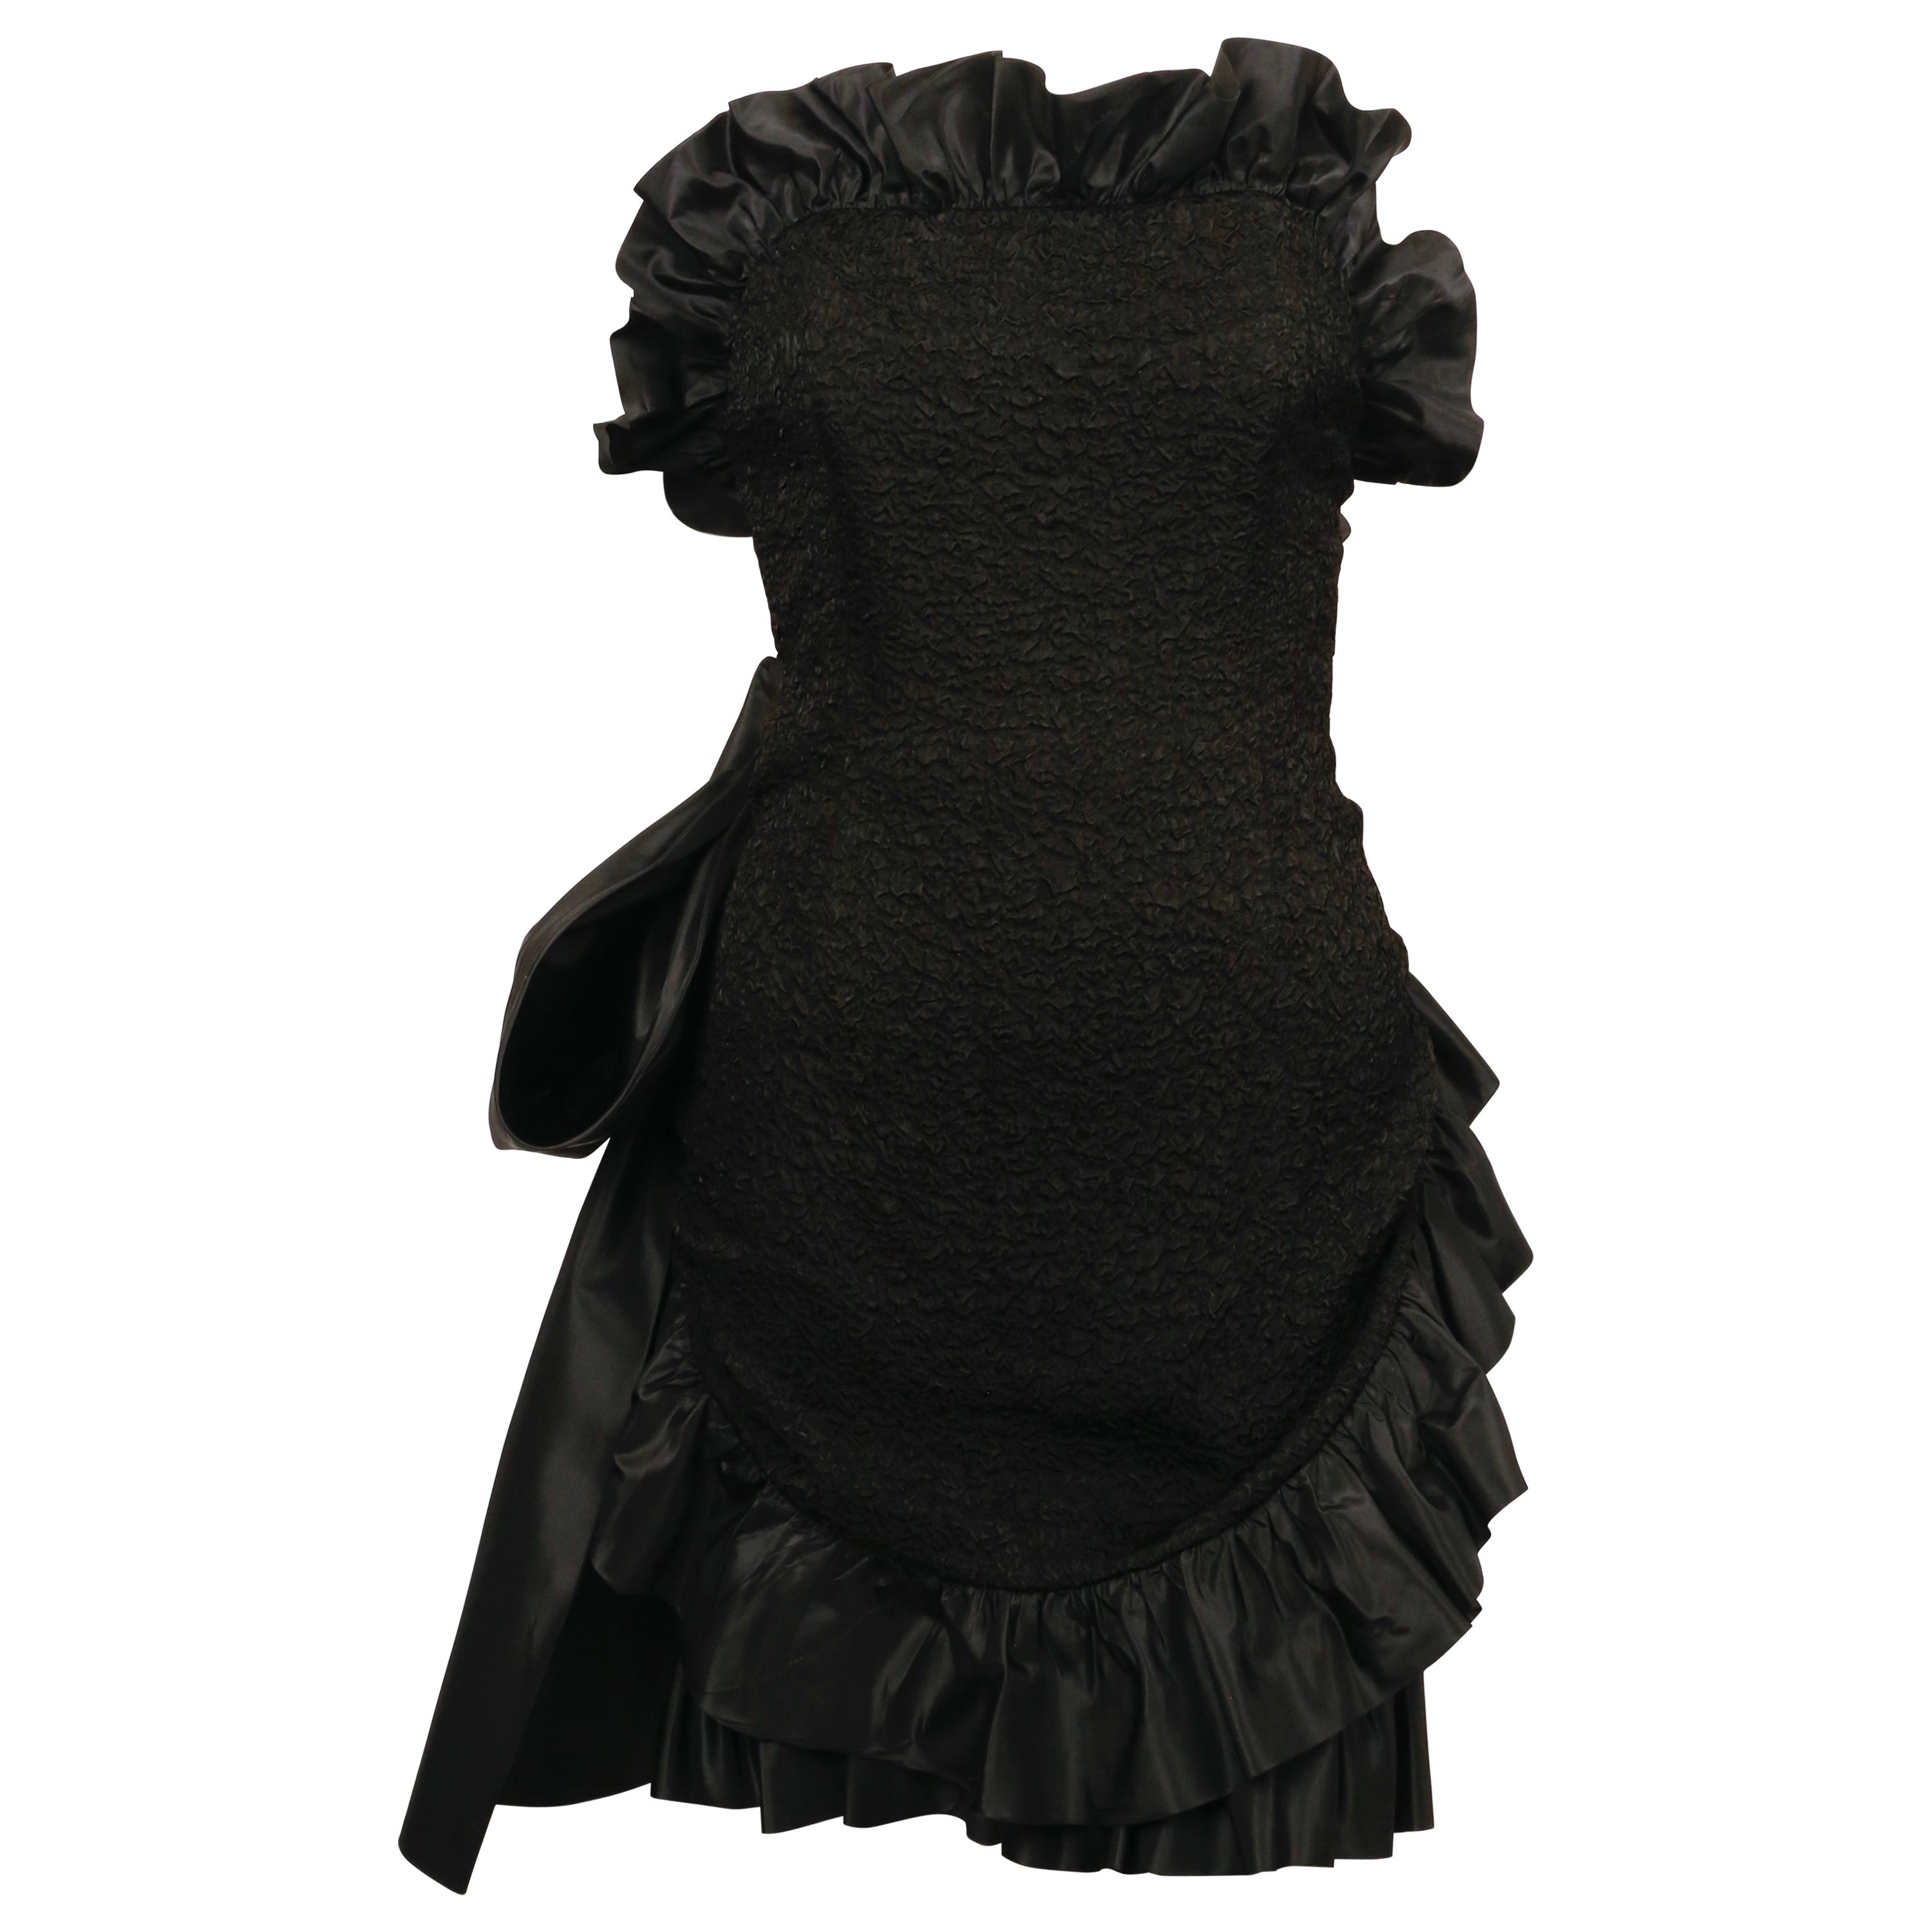 1980's YVES SAINT LAURENT black strapless dress with ruffles and bow For Sale